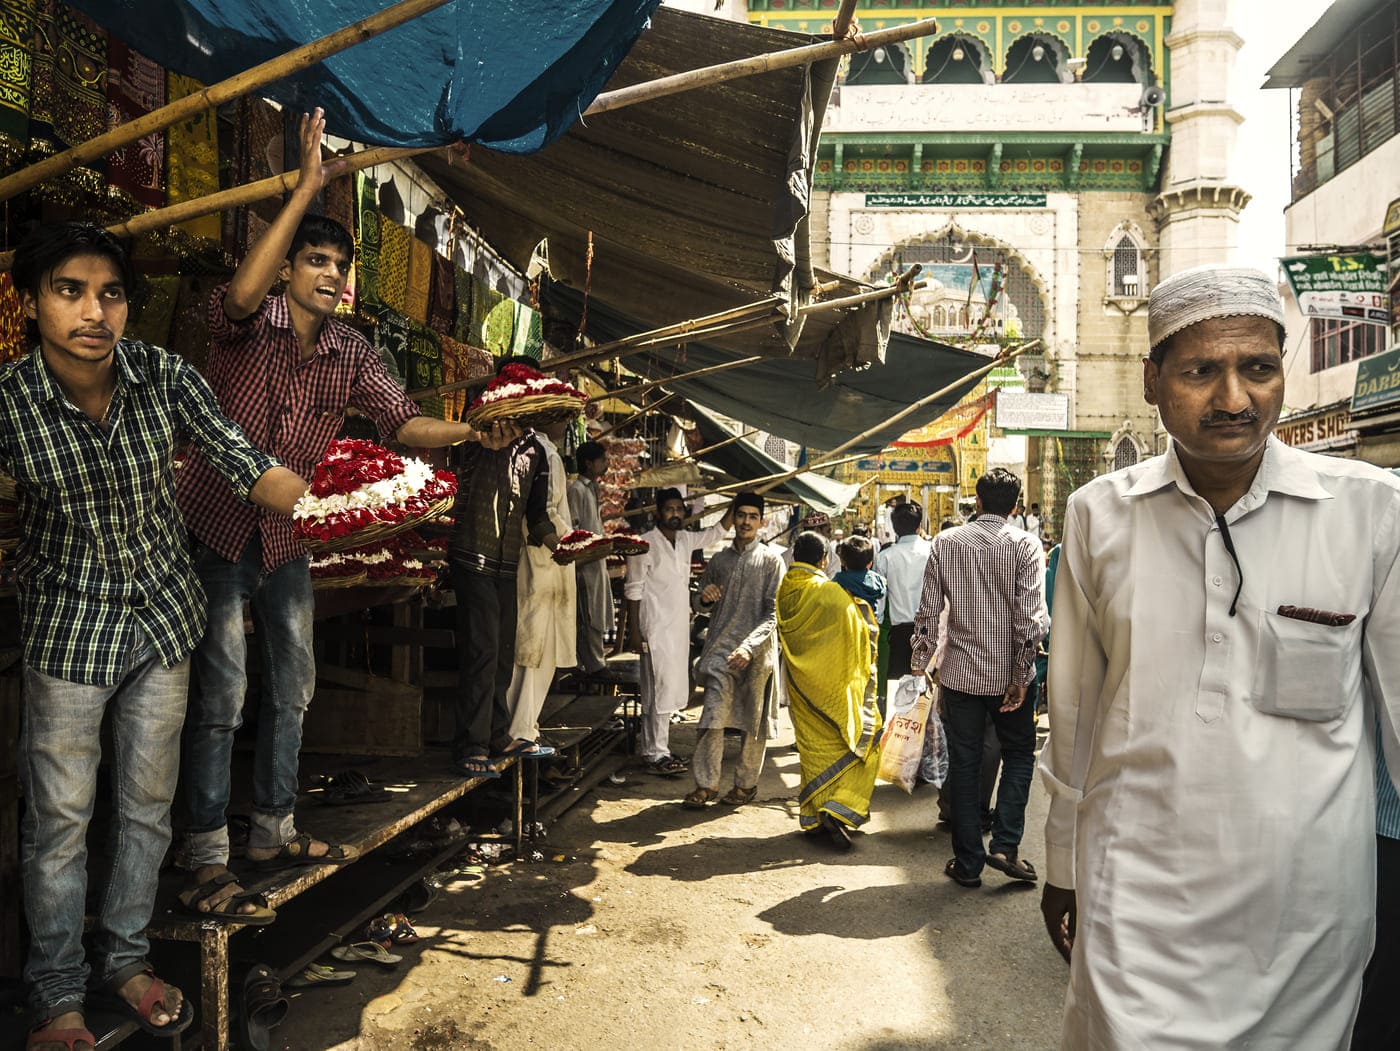 11.Pushkar’s neighboring city Ajmer is famous as a major Muslim pilgrimage center. In the street leading to the Ajmer shrine dedicated to the Sufi Saint Khwaja Moinuddin Chishti, many stalls sell offerings such as flowers to devotees 